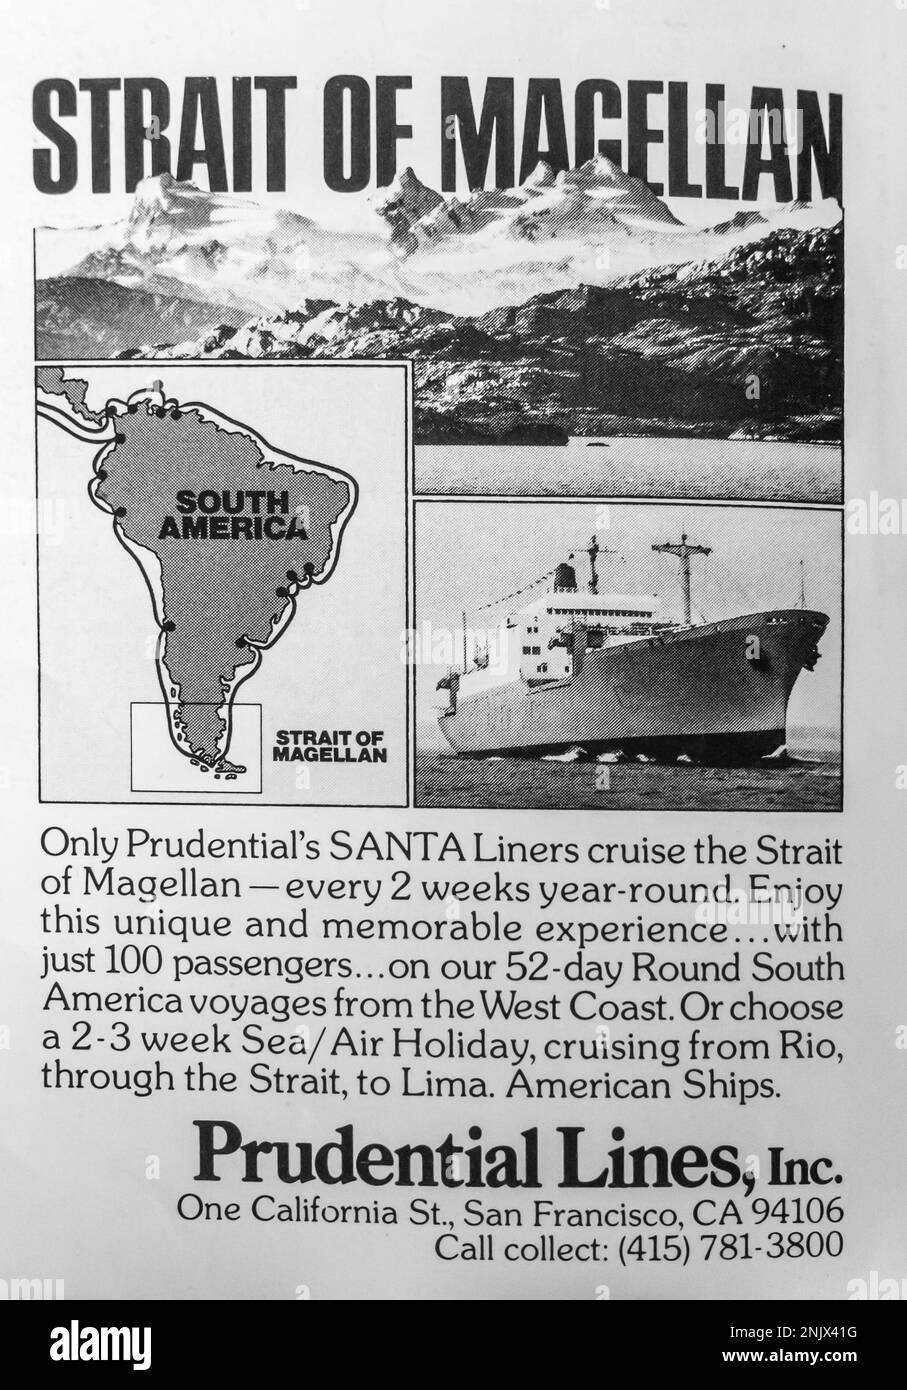 Prudential Lines Liners cruise - Strait of Magellan travel adventure advertisement in a NatGeo magazine, June 1976 Stock Photo